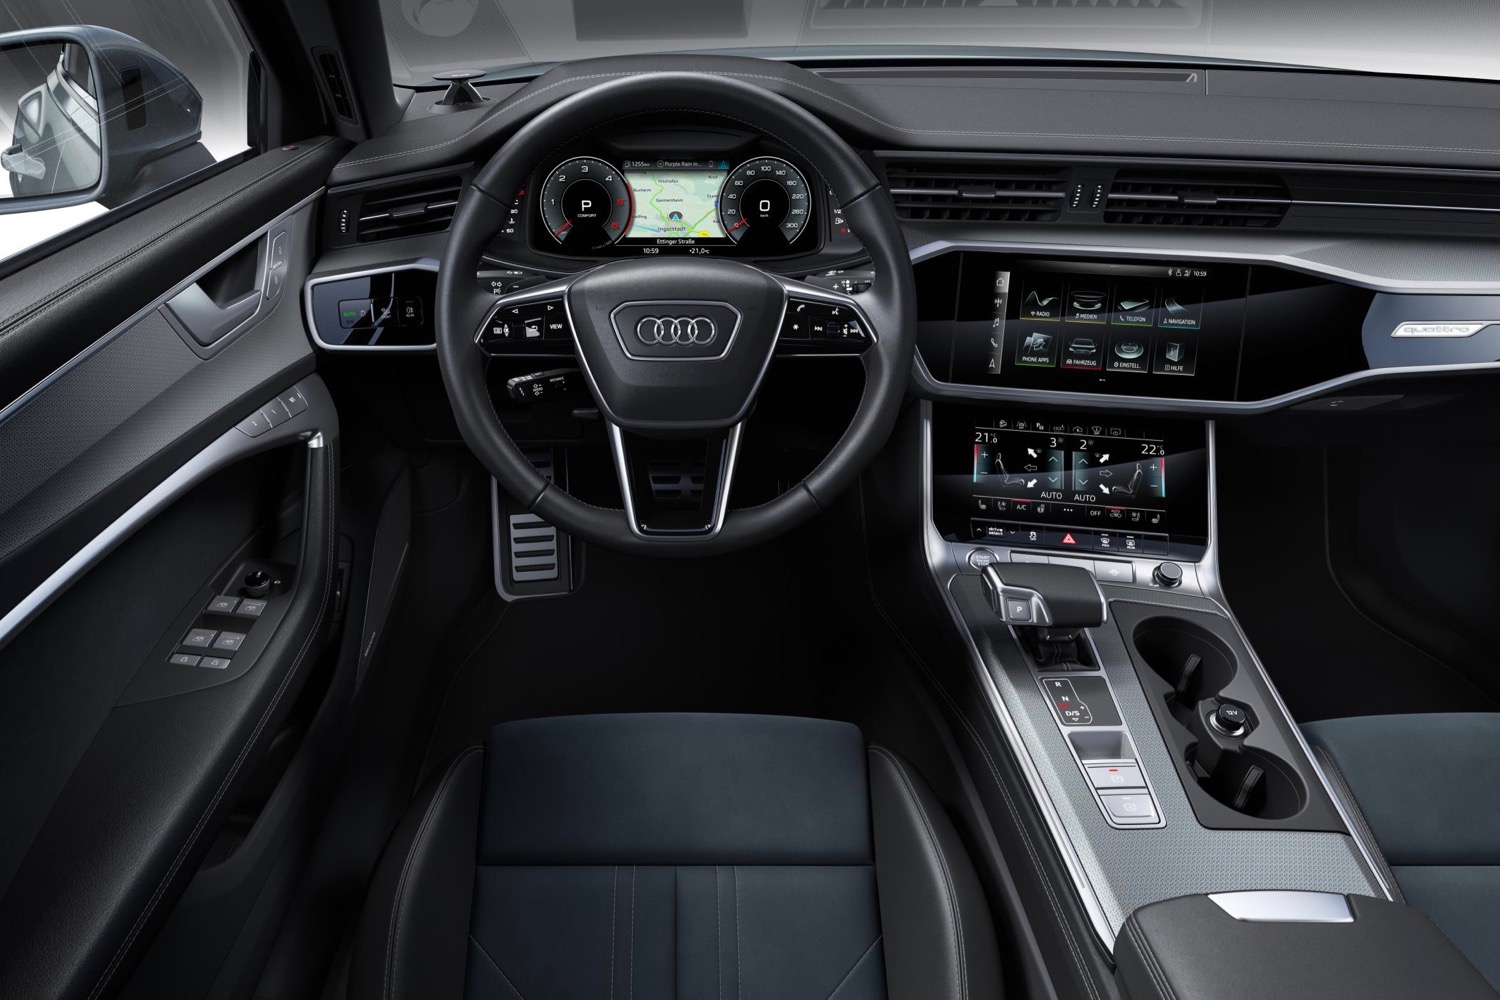 2020 Audi A6 Allroad Wagon Is Coming Back to The U.S. | Digital Trends